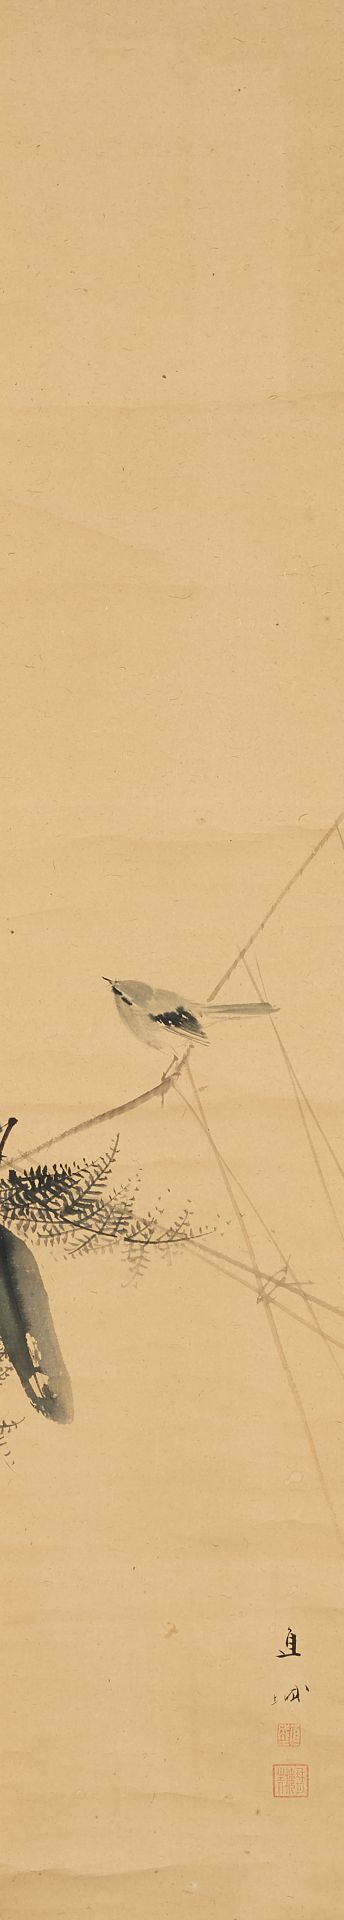 THREE HANGING PICTURES WITH BIRDS. Japan. 19th c. Ink on silk/paper. Mounted as hanging scroll. - Image 3 of 4